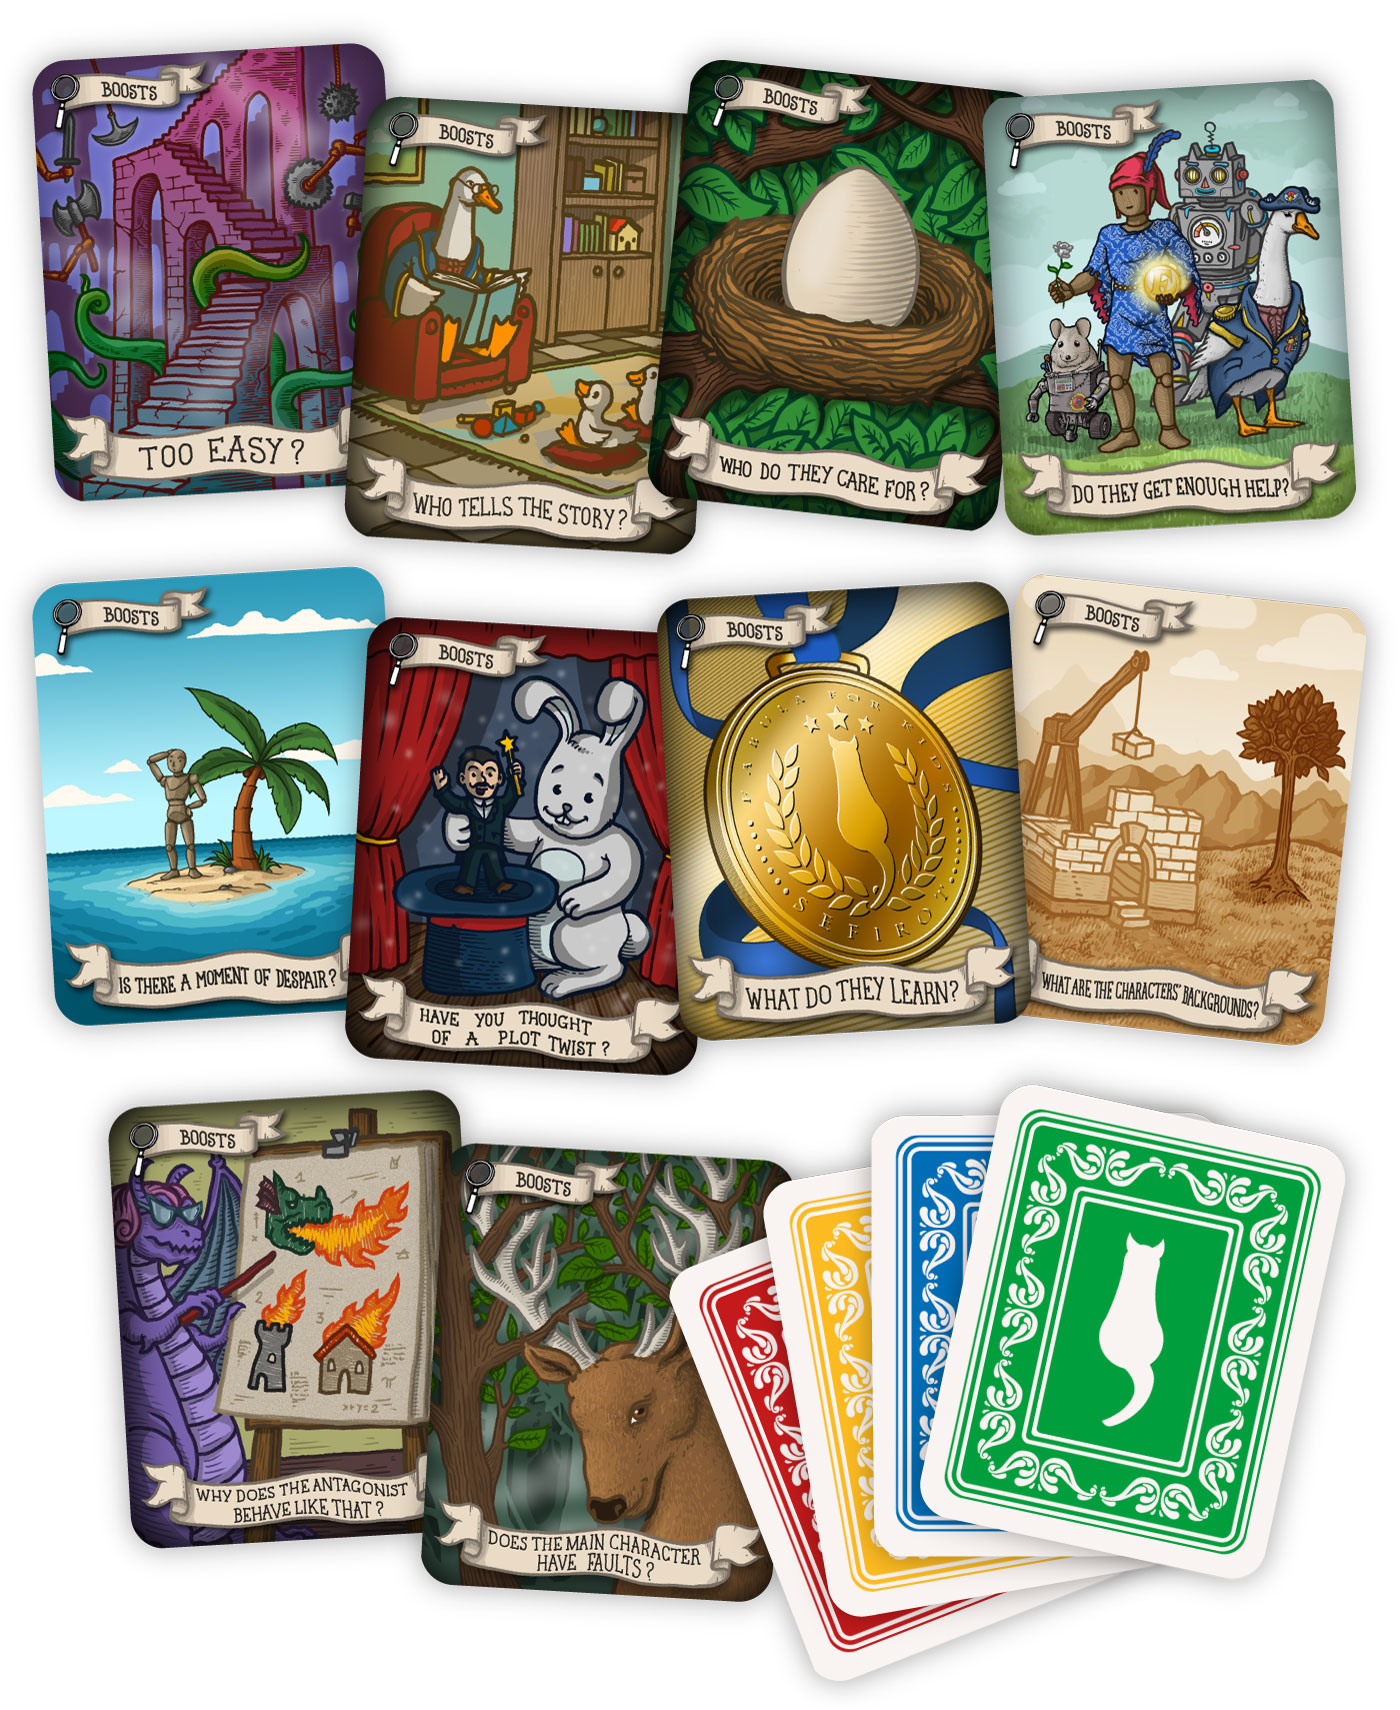 Plot Twist: A Storytelling Card Game, Board Game